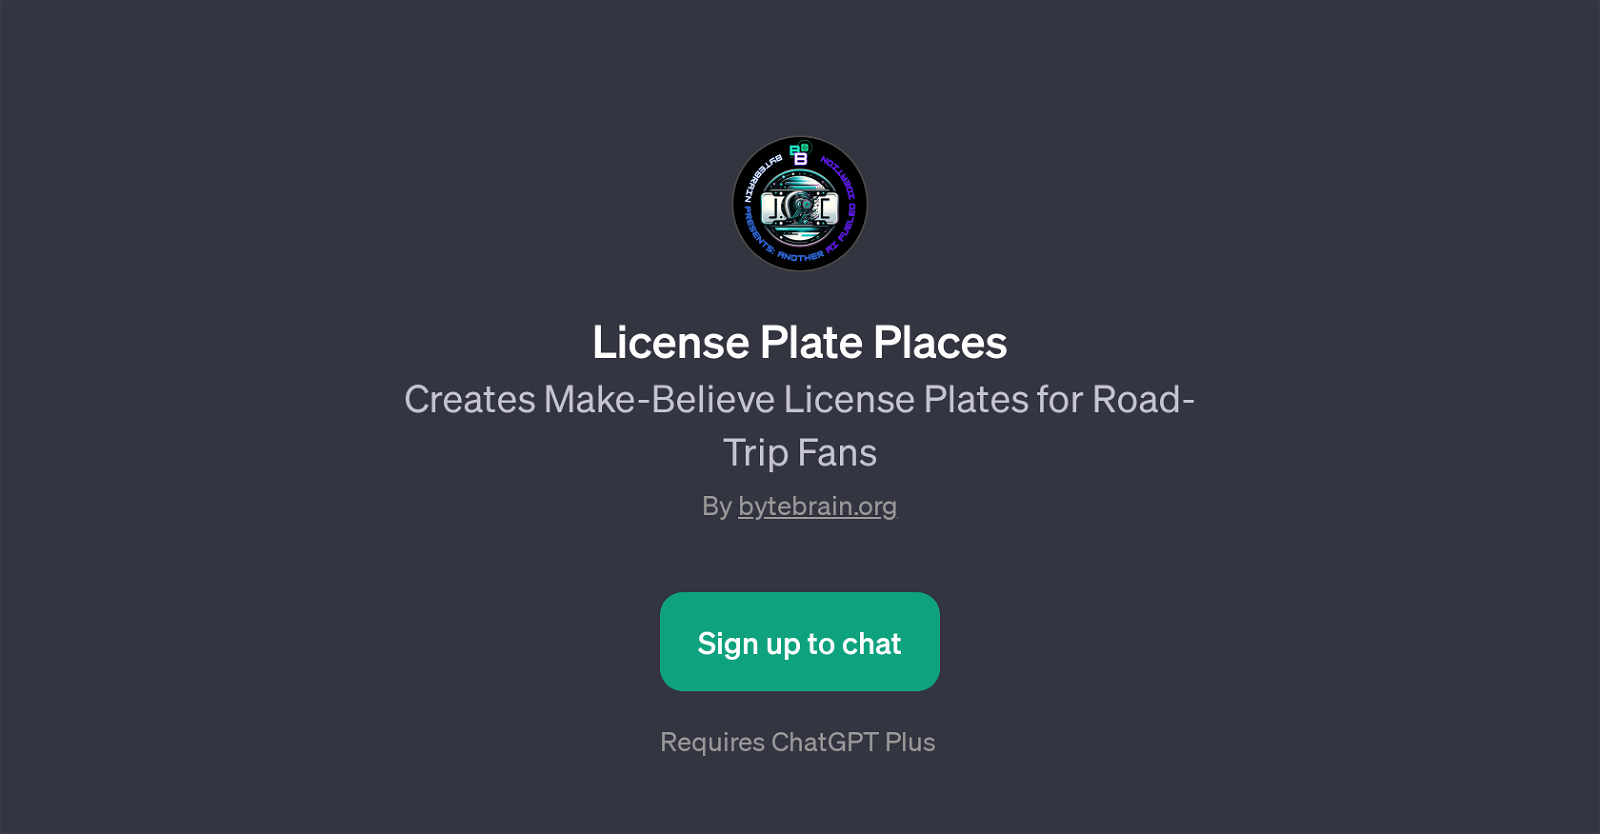 License Plate Places website